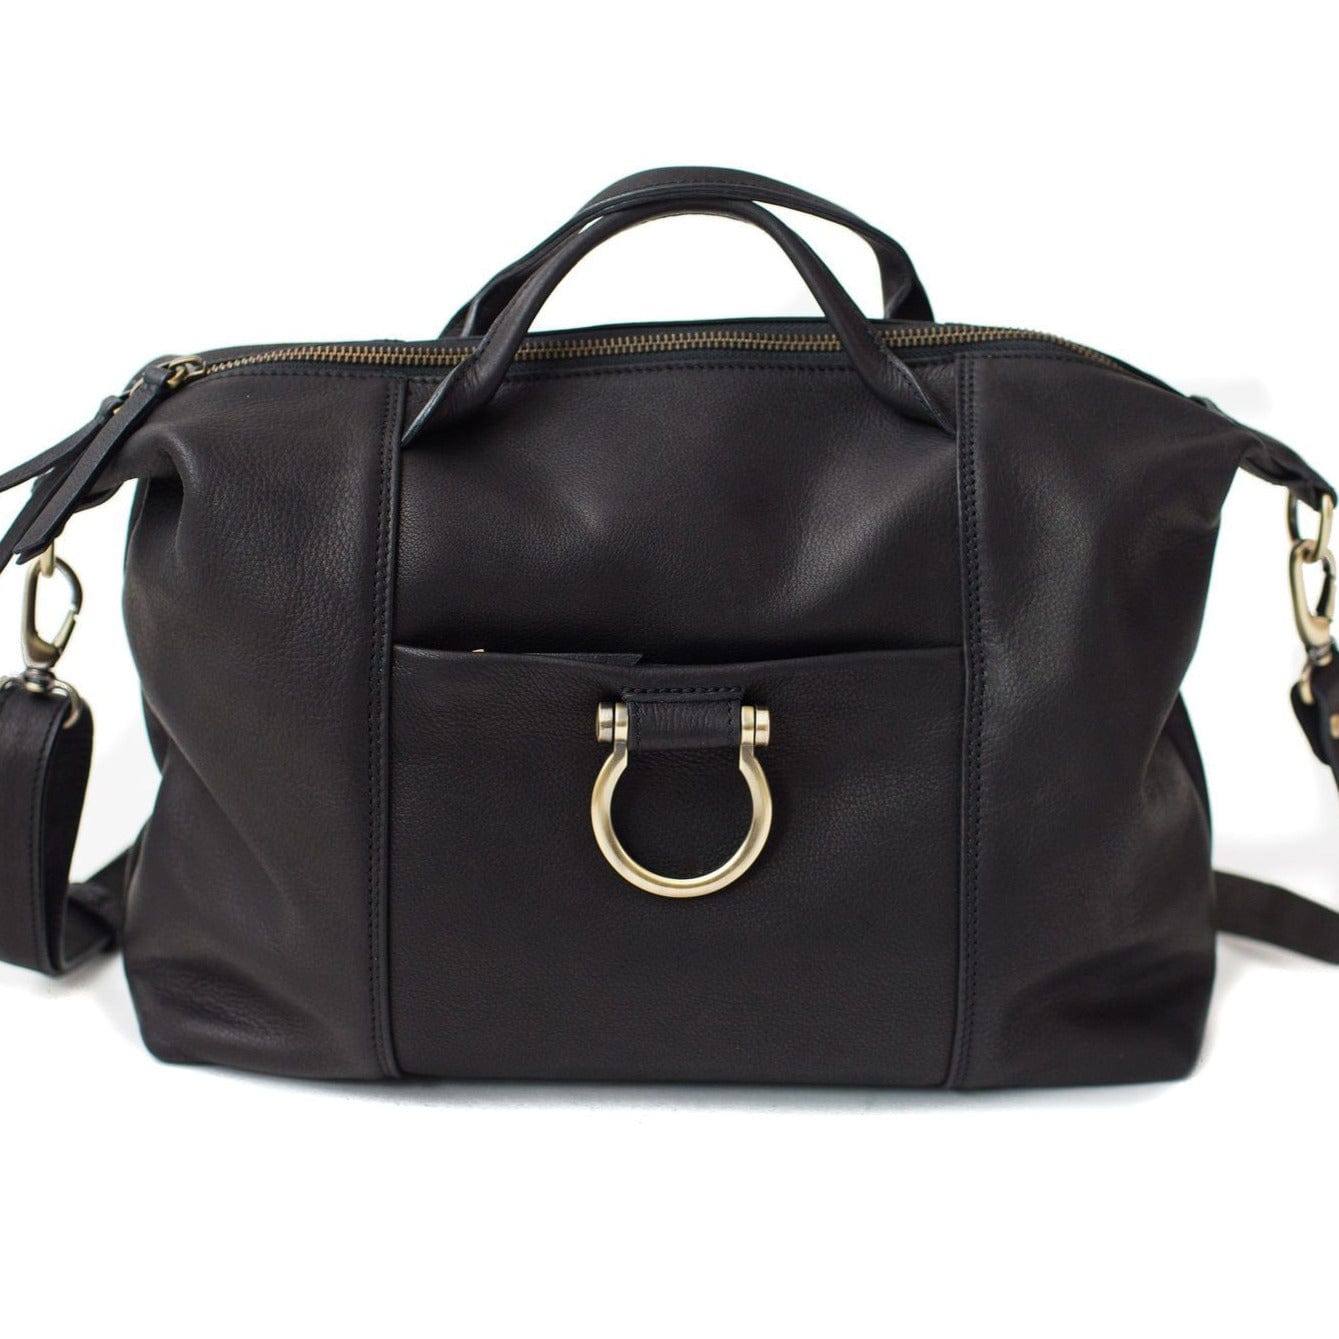 Linda Jean: large handbag in black raw leather with top zip, removable strap, and exterior zippered pocket.